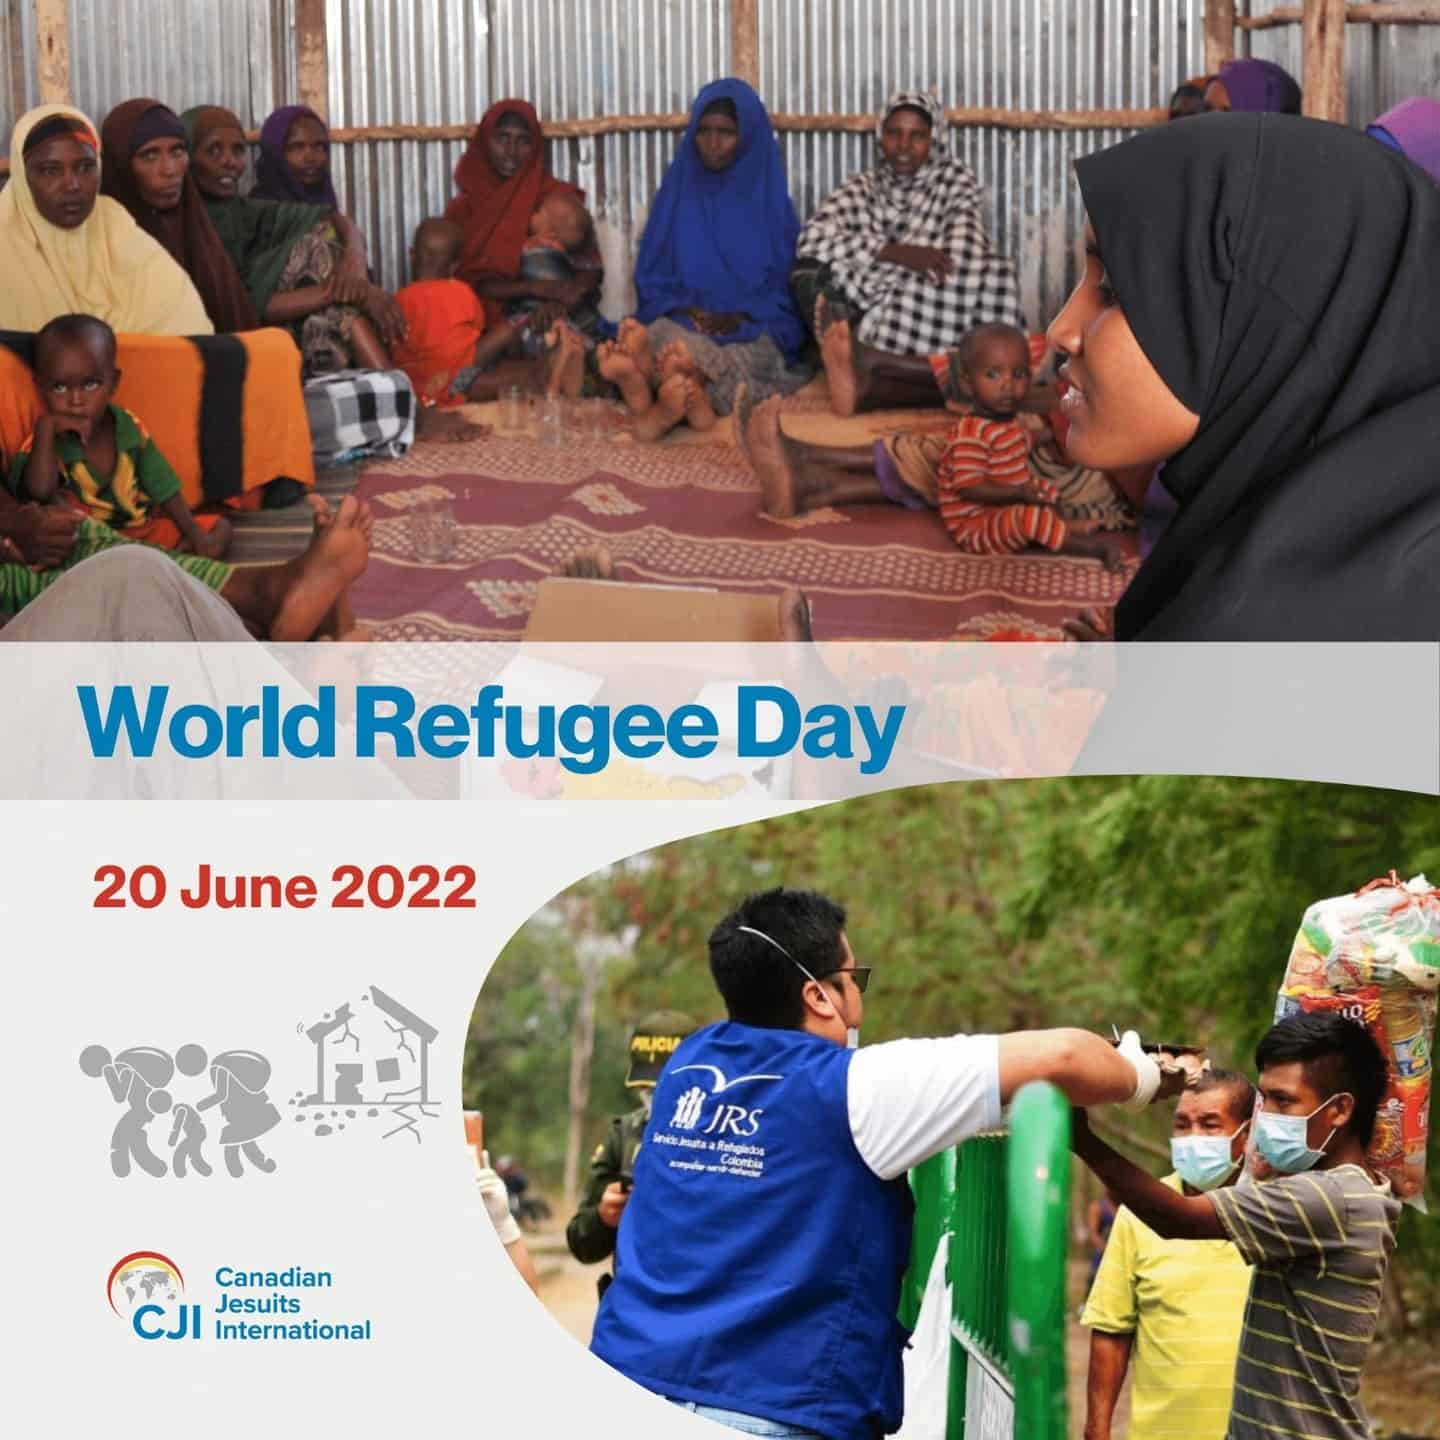 On #WorldRefugeeDay2022, CJI stands in solidarity with all forcibly displaced people and supports the work of Jesuit Refugee Service (JRS) in Colombia, Ethiopia, Lebanon, South Sudan, Syria, Venezuela and Ukraine and its neighbouring countries. CJI also supports the work of Jesuit Migrant Service (SJM) in Mexico, Haiti, Brazil and Venezuela.